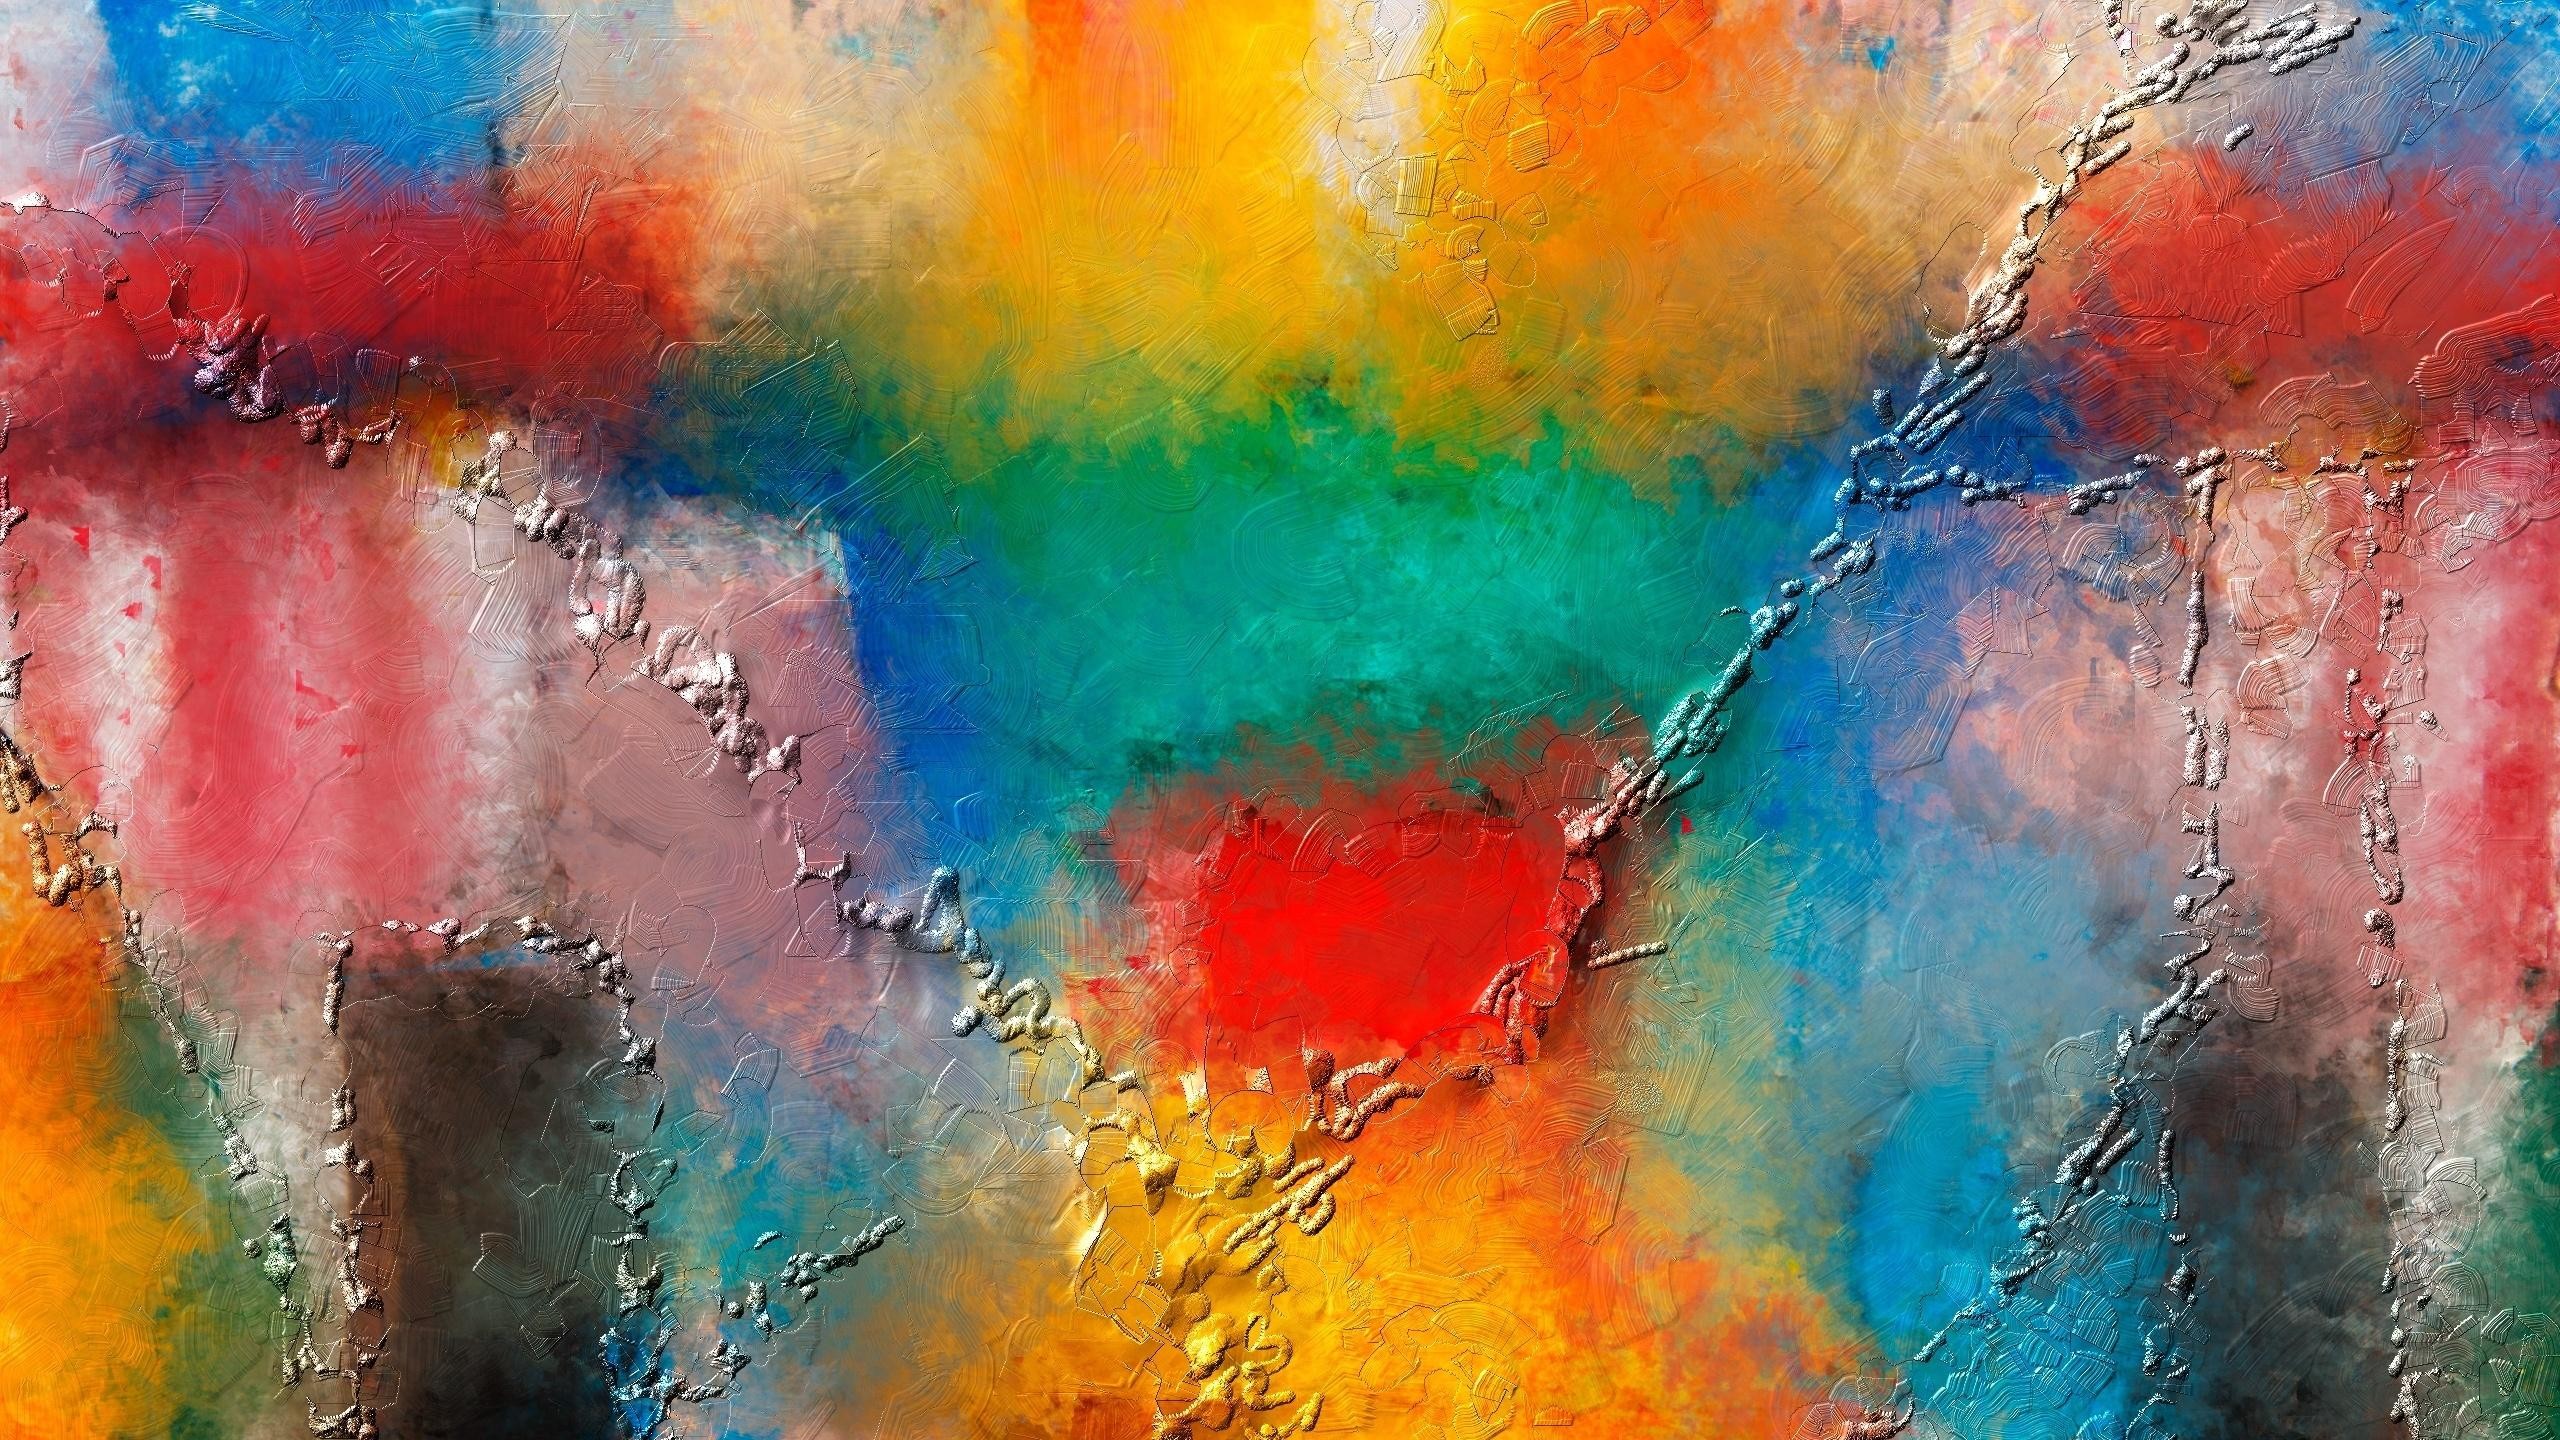 General 2560x1440 abstract painting colorful artwork digital art